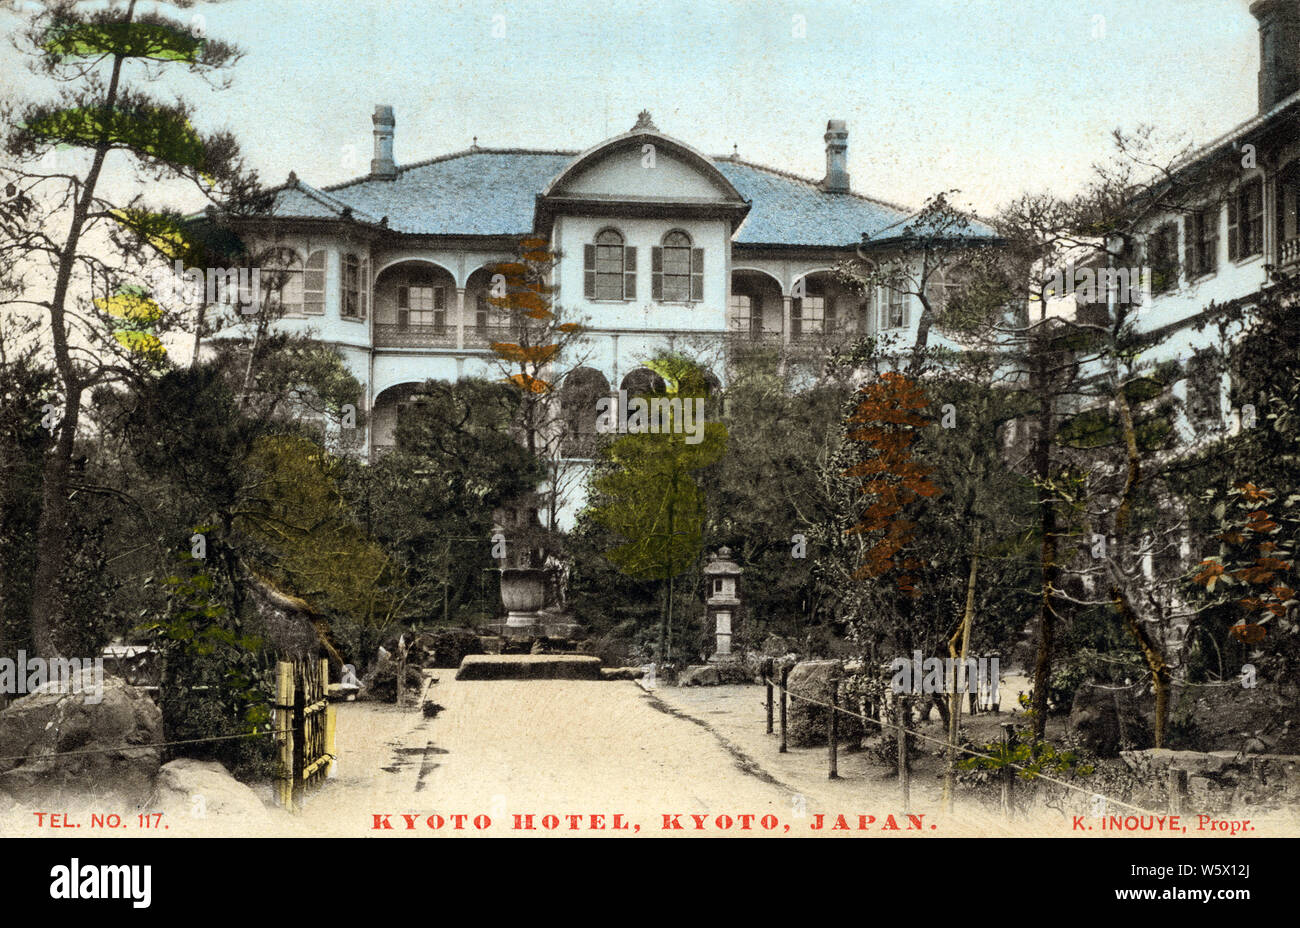 [ 1900s Japan - Kyoto Hotel ] —   The Kyoto Hotel in Kyoto City. The hotel was opened as the Tokiwa Hotel by Matakichi Maeda on April 14, 1890 (Meiji 23). The name was changed to the Kyoto Hotel in 1895 (Meiji 28). The building on this postcard was designed by Jimbee Kawashima (1853-1910). The hotel was owned by Kitaro Inoue from 1895 to 1927. A modern building replaced the traditional building in 1994 (Heisei 6).  20th century vintage postcard. Stock Photo